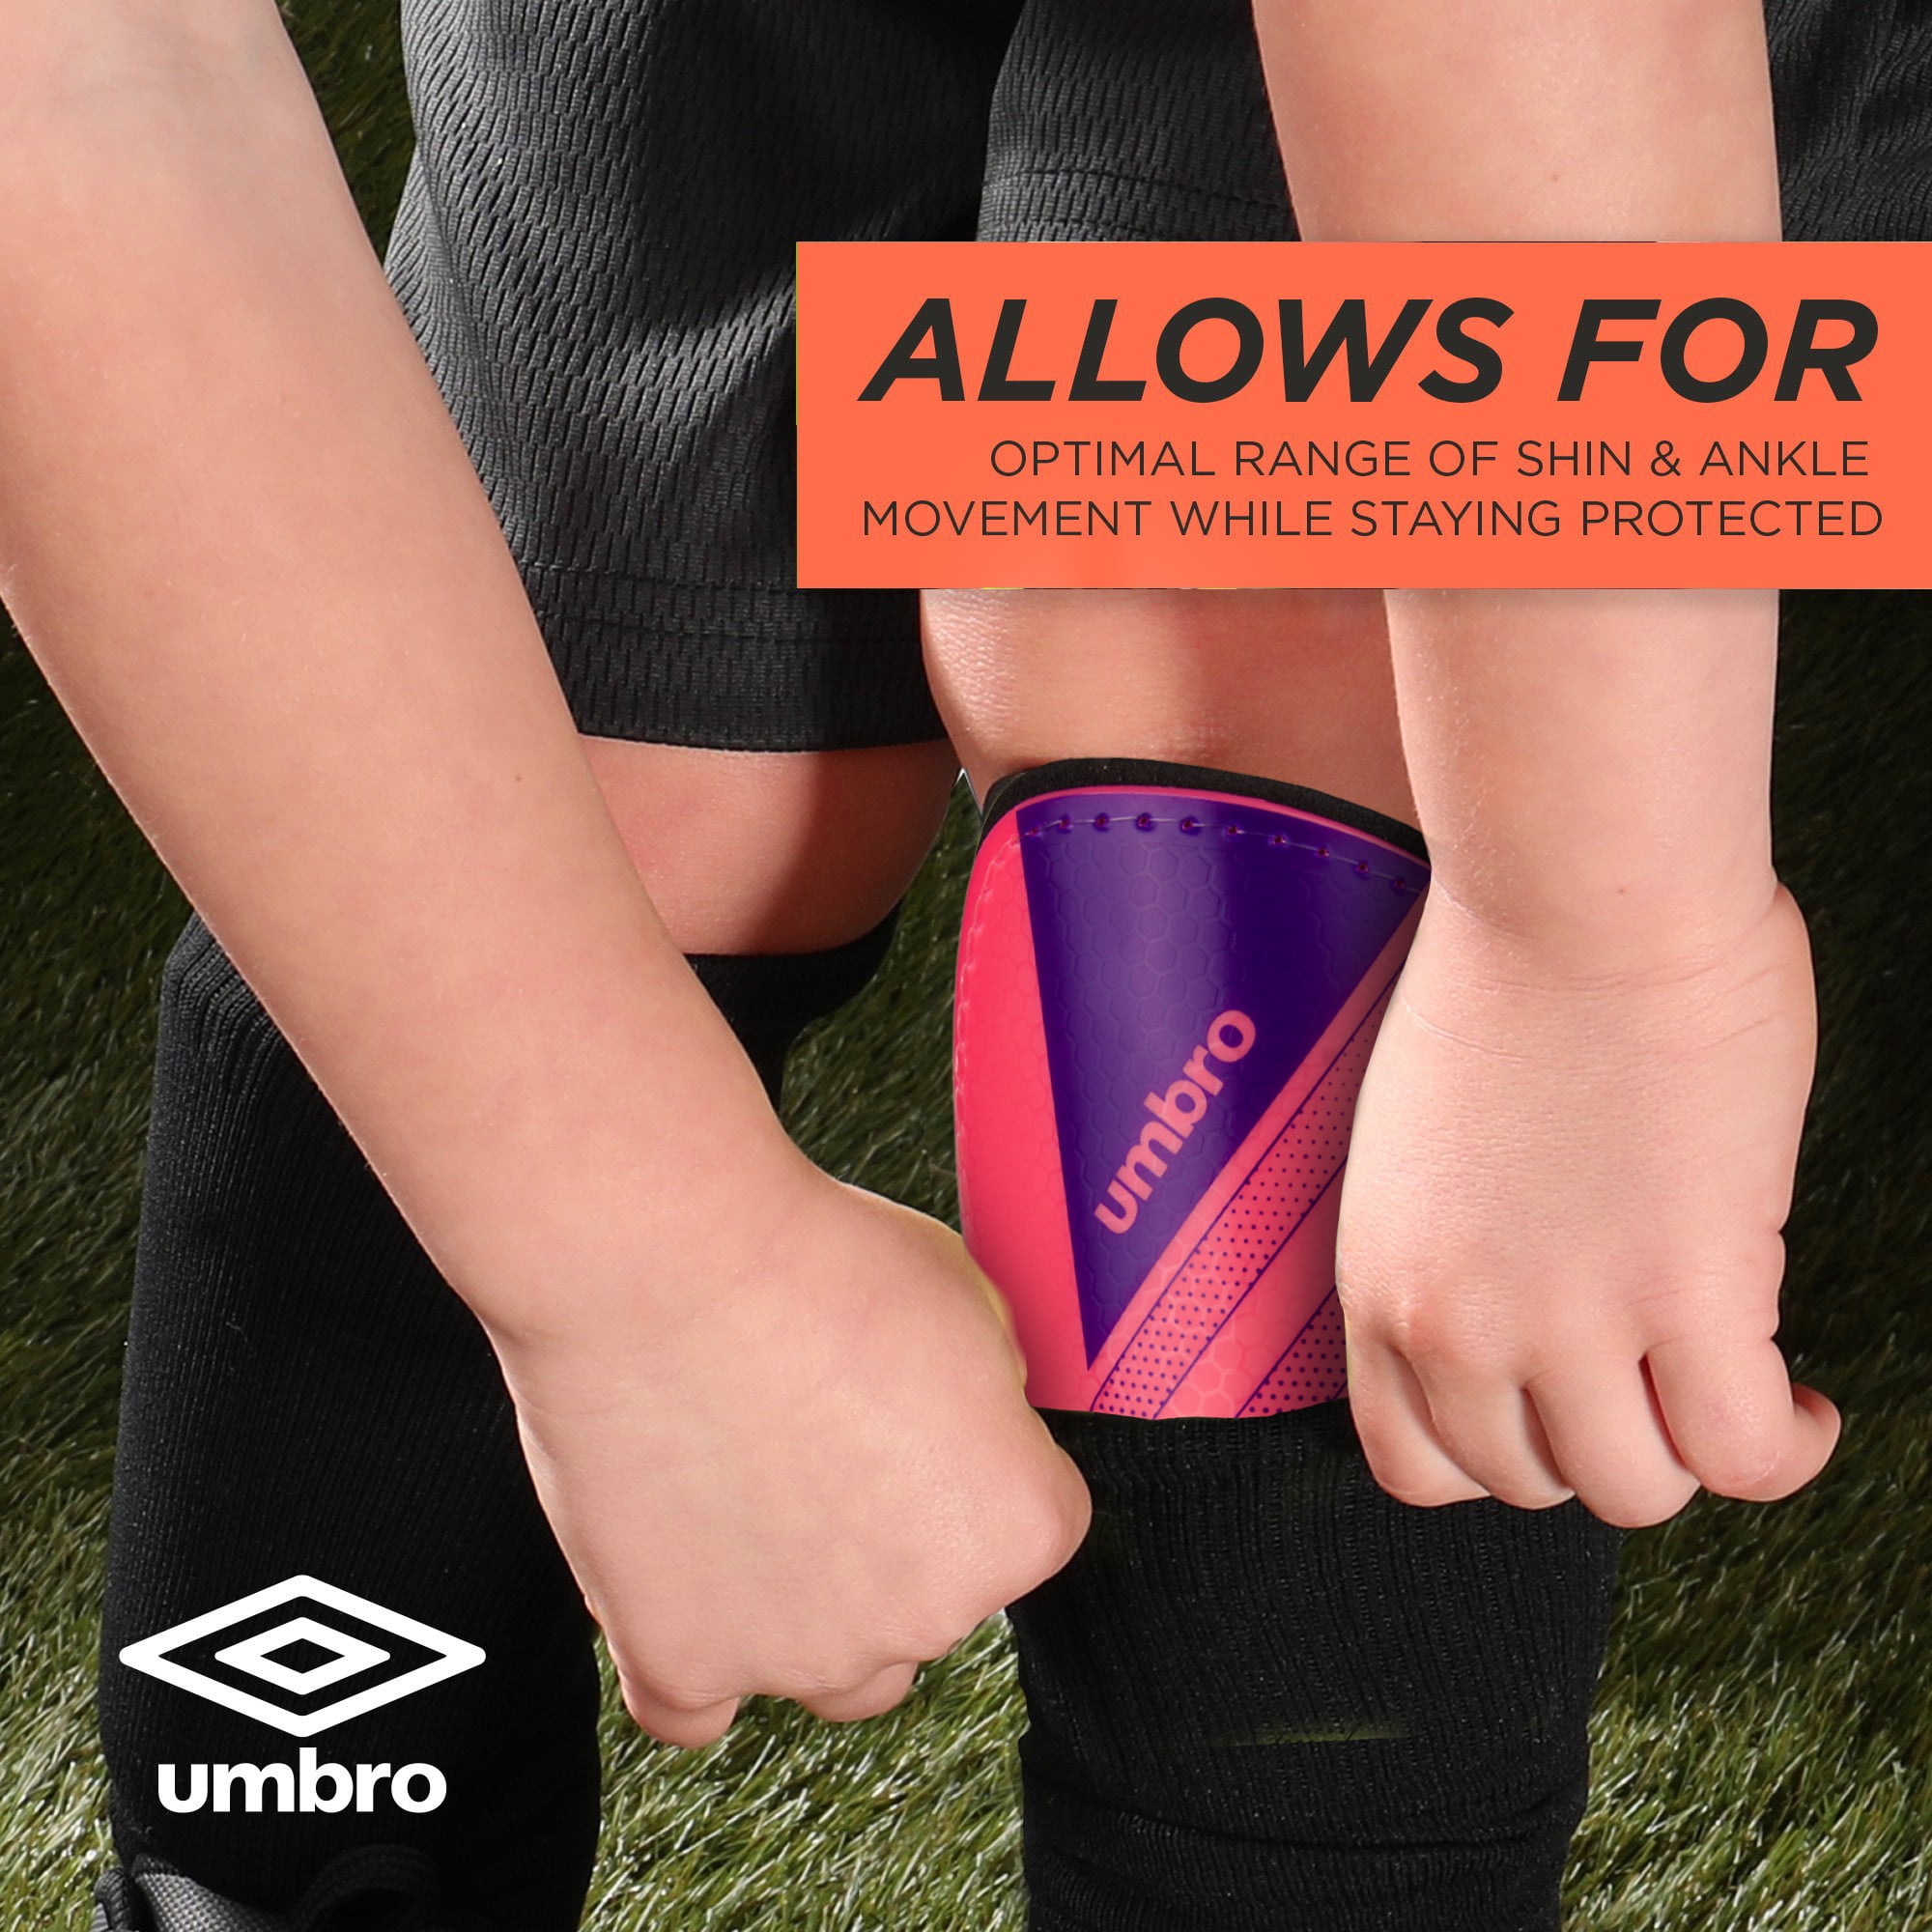 Umbro Ceramica Ankle Soccer Shin Guards - PeeWee, Child size 